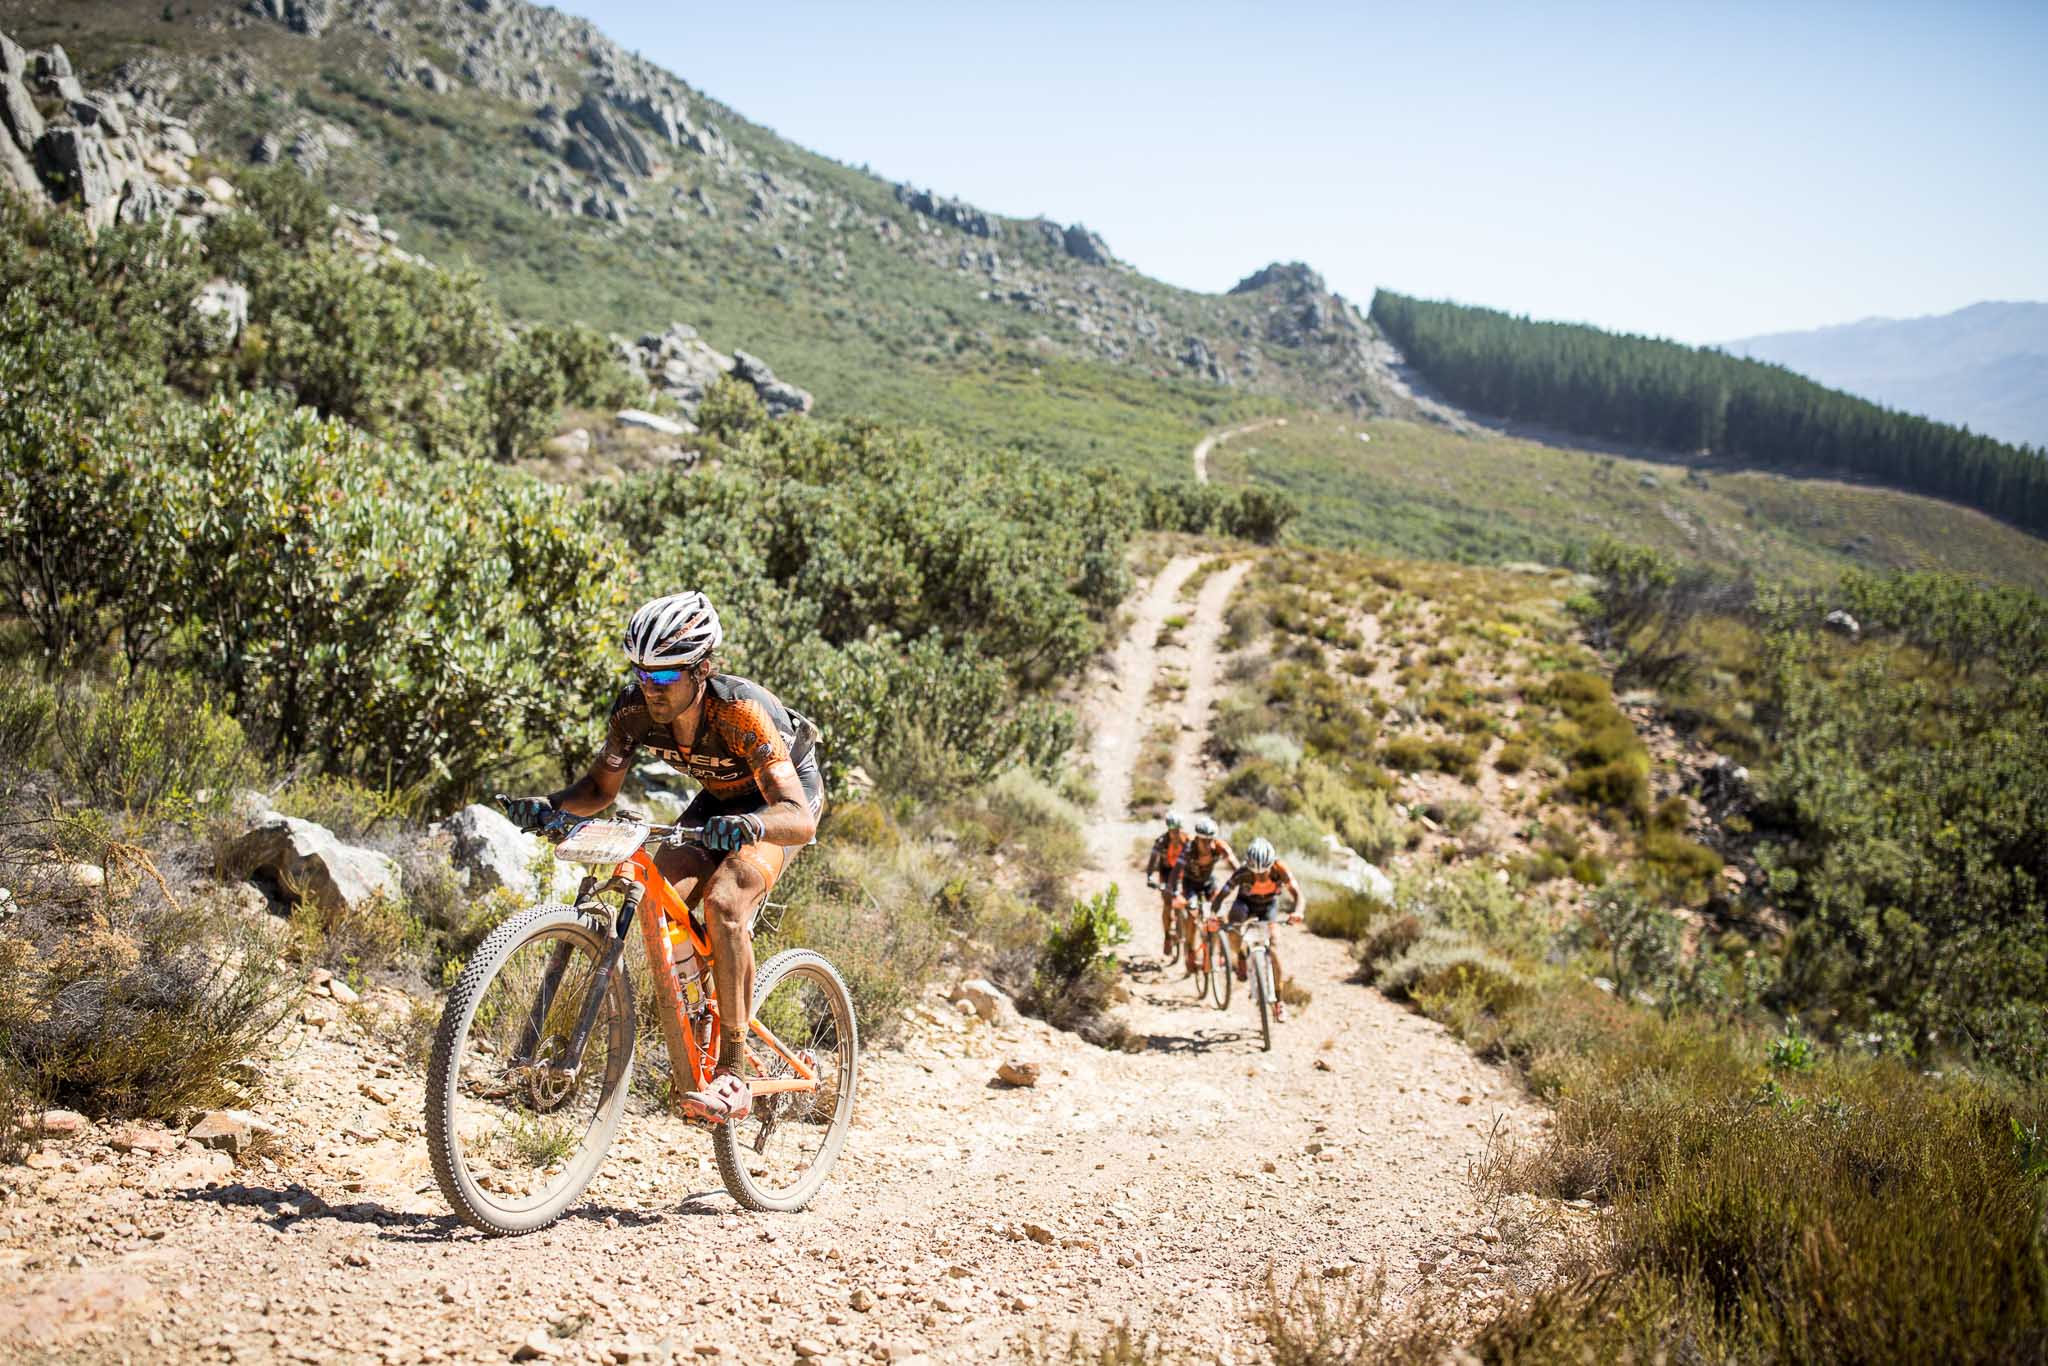 Samuele Porro and Damiano Ferraro of Team Trek-Selle San Marco A and Ivan Alvarez Gutierrez and Fabian Rabensteiner of Team Trek-Selle San Marco B during stage 2 of the 2016 Absa Cape Epic Mountain Bike stage race from Saronsberg Wine Estate in Tulbagh, South Africa on the 15th March 2016 Photo by Nick Muzik/Cape Epic/SPORTZPICS PLEASE ENSURE THE APPROPRIATE CREDIT IS GIVEN TO THE PHOTOGRAPHER AND SPORTZPICS ALONG WITH THE ABSA CAPE EPIC ace2016